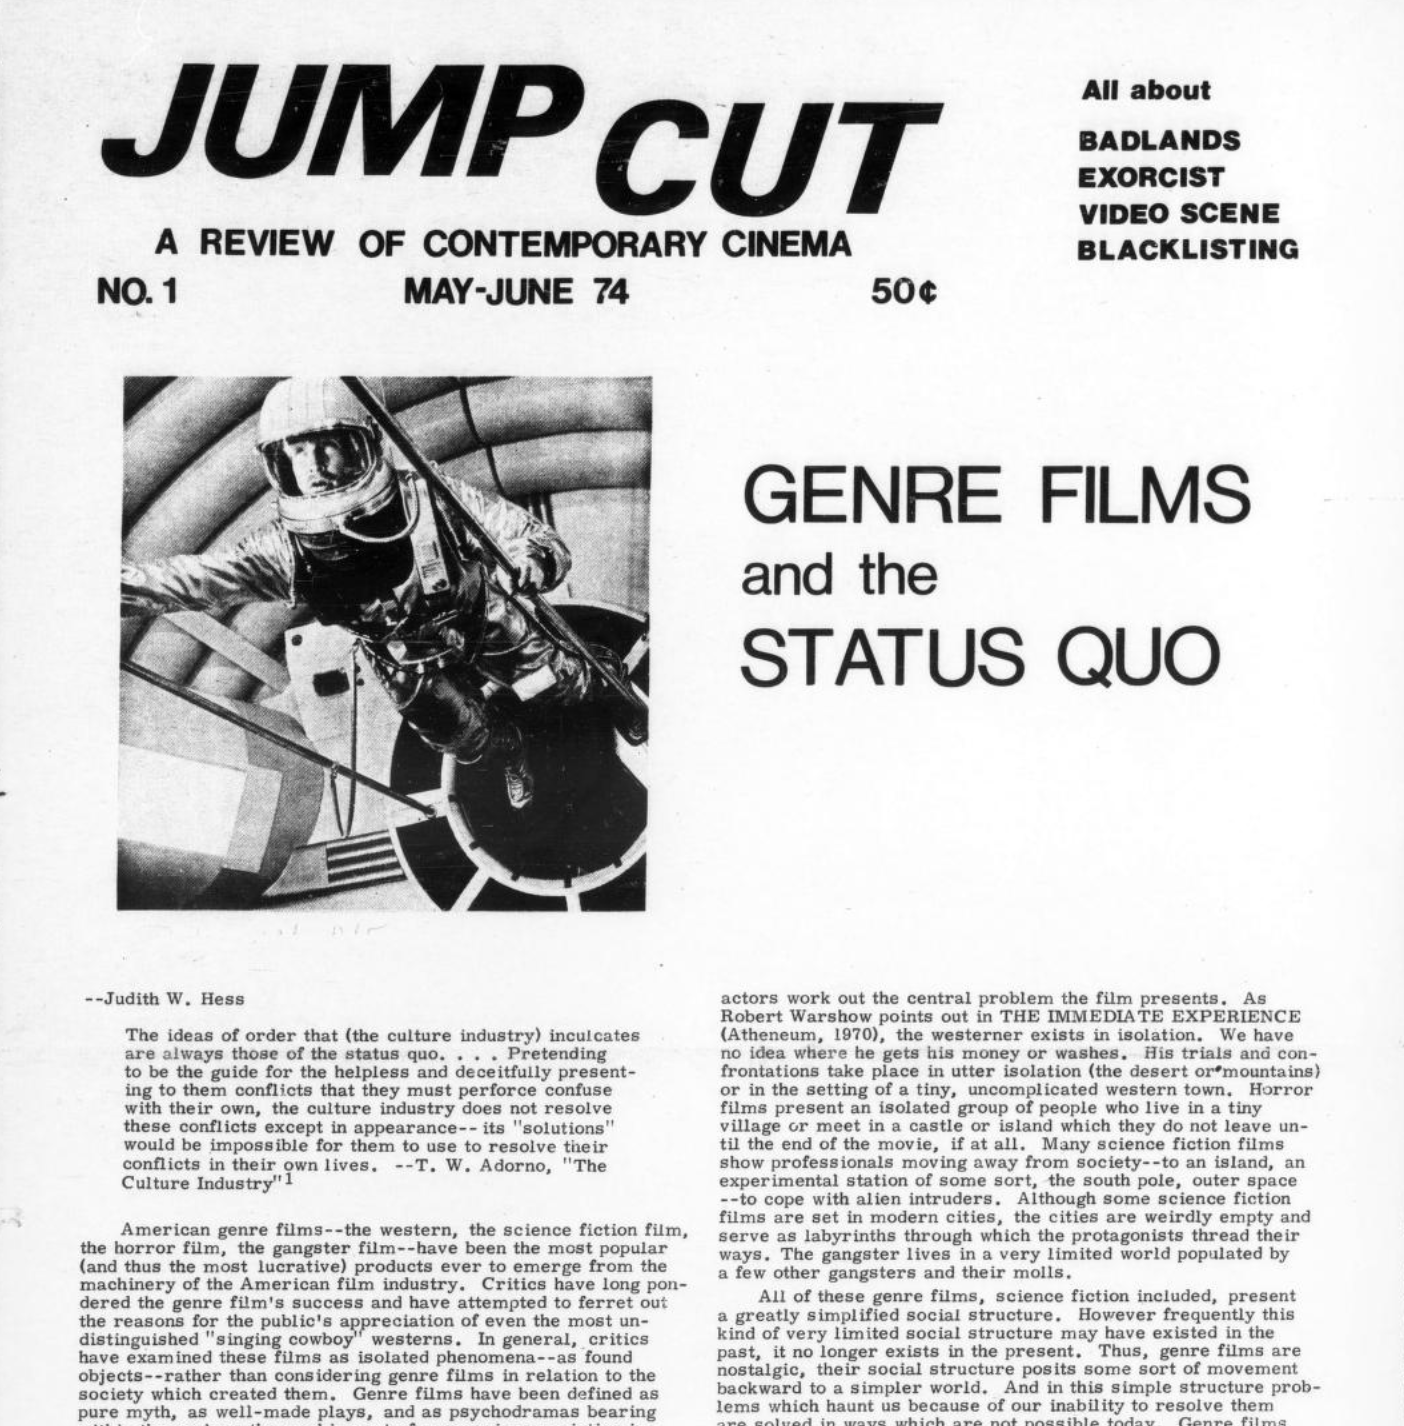 Cover of Jump Cut from May 1974 with a photo of an astronaut